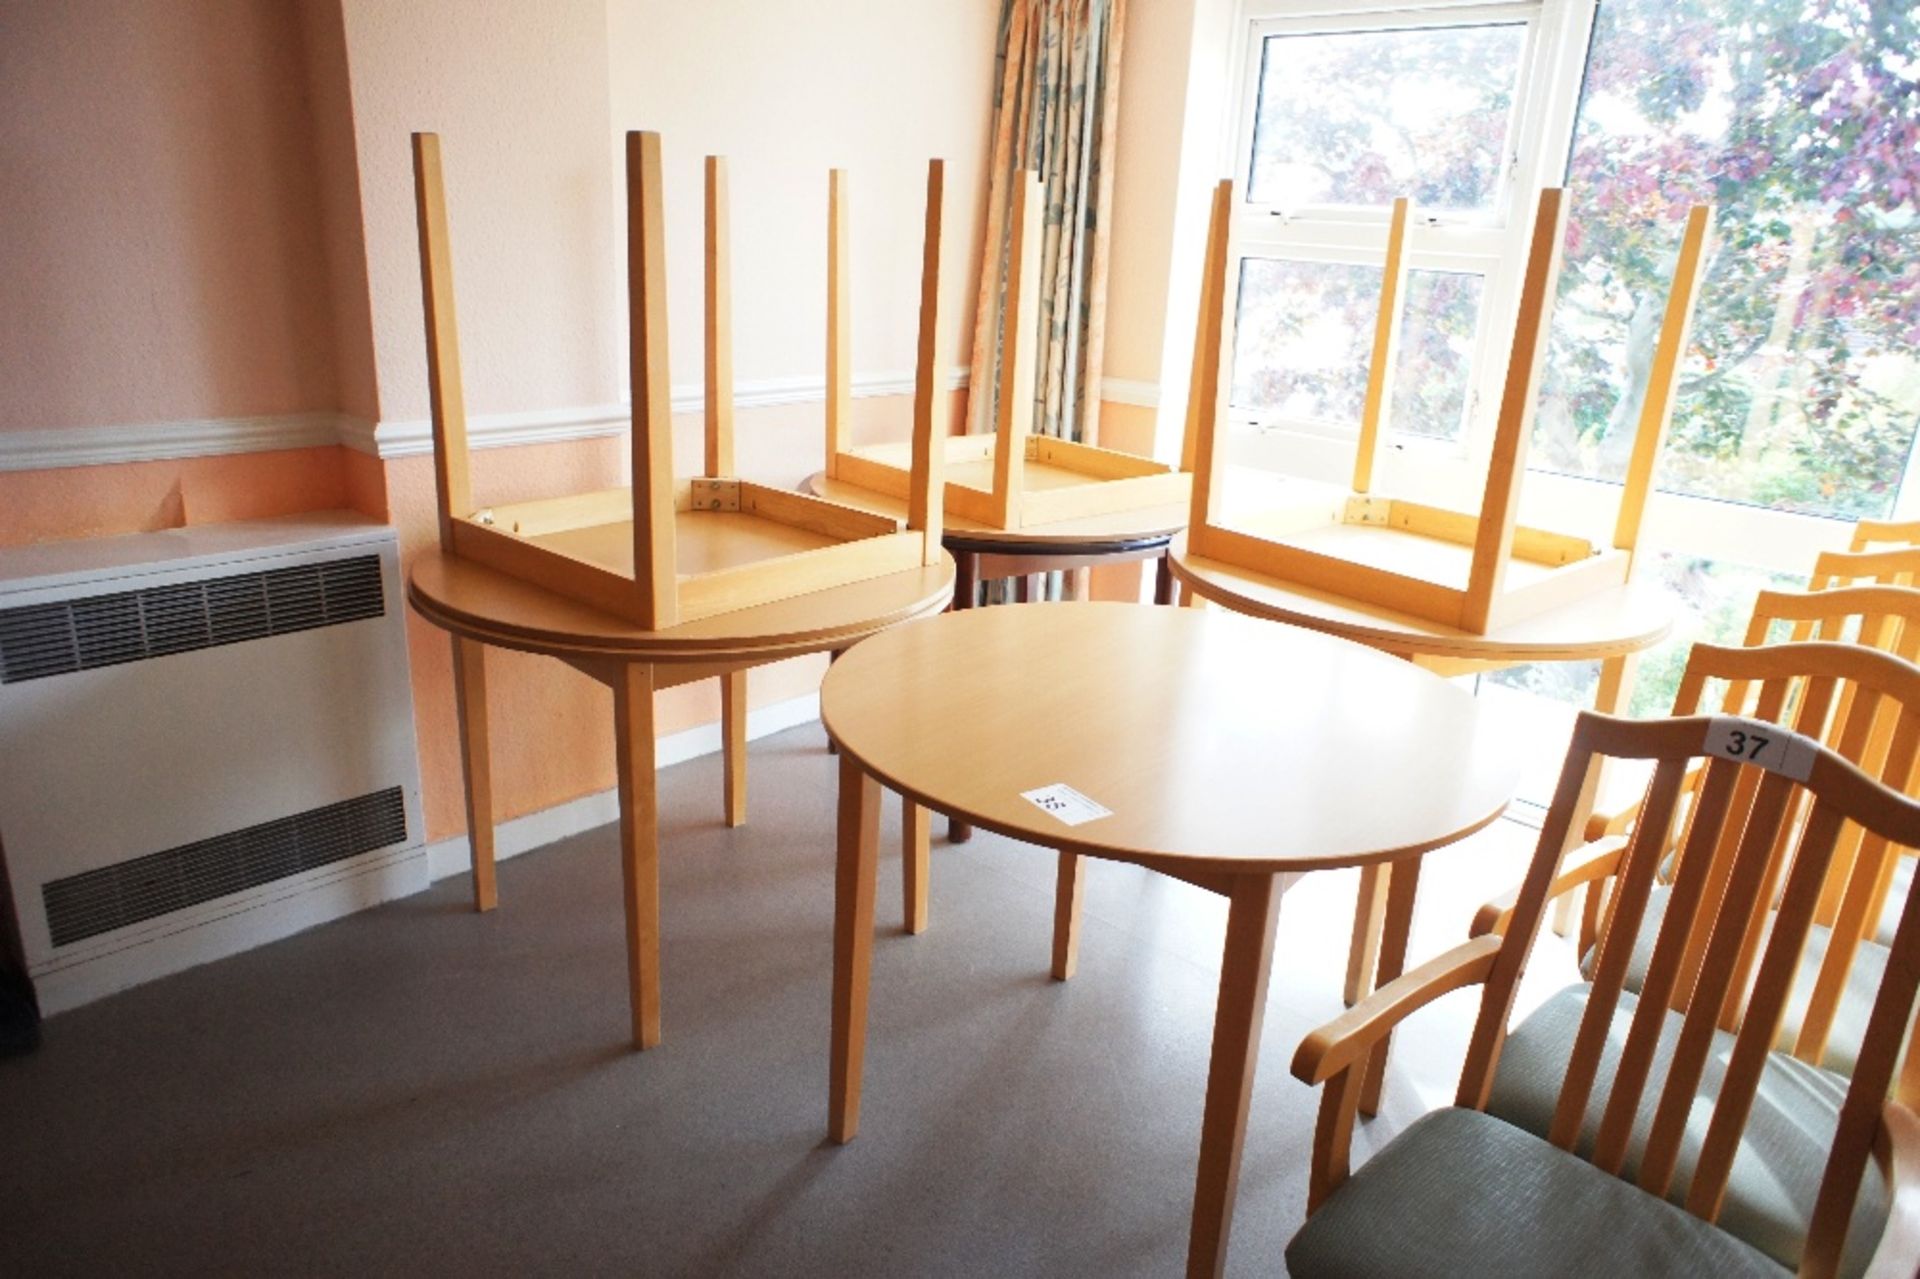 7 lightwood circular topped canteen tables (located in room 17, Davey Court)